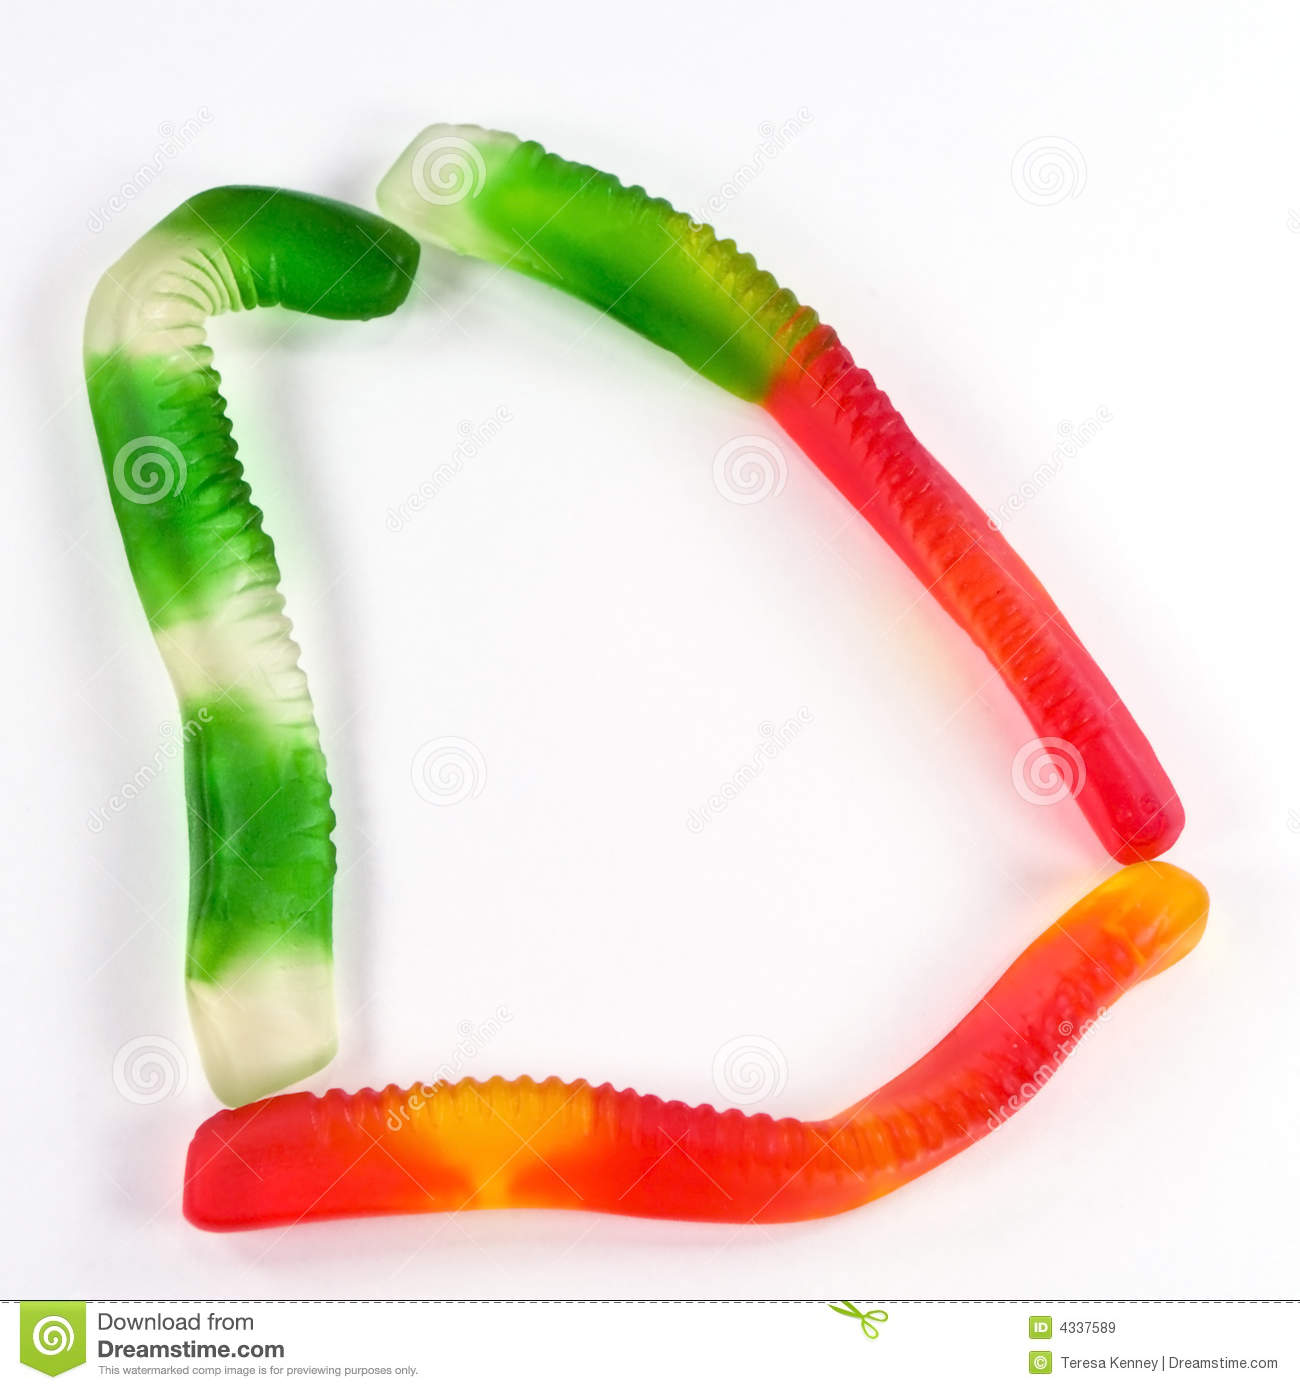 Gummy Worms Royalty Free Stock Images   Image  4337589